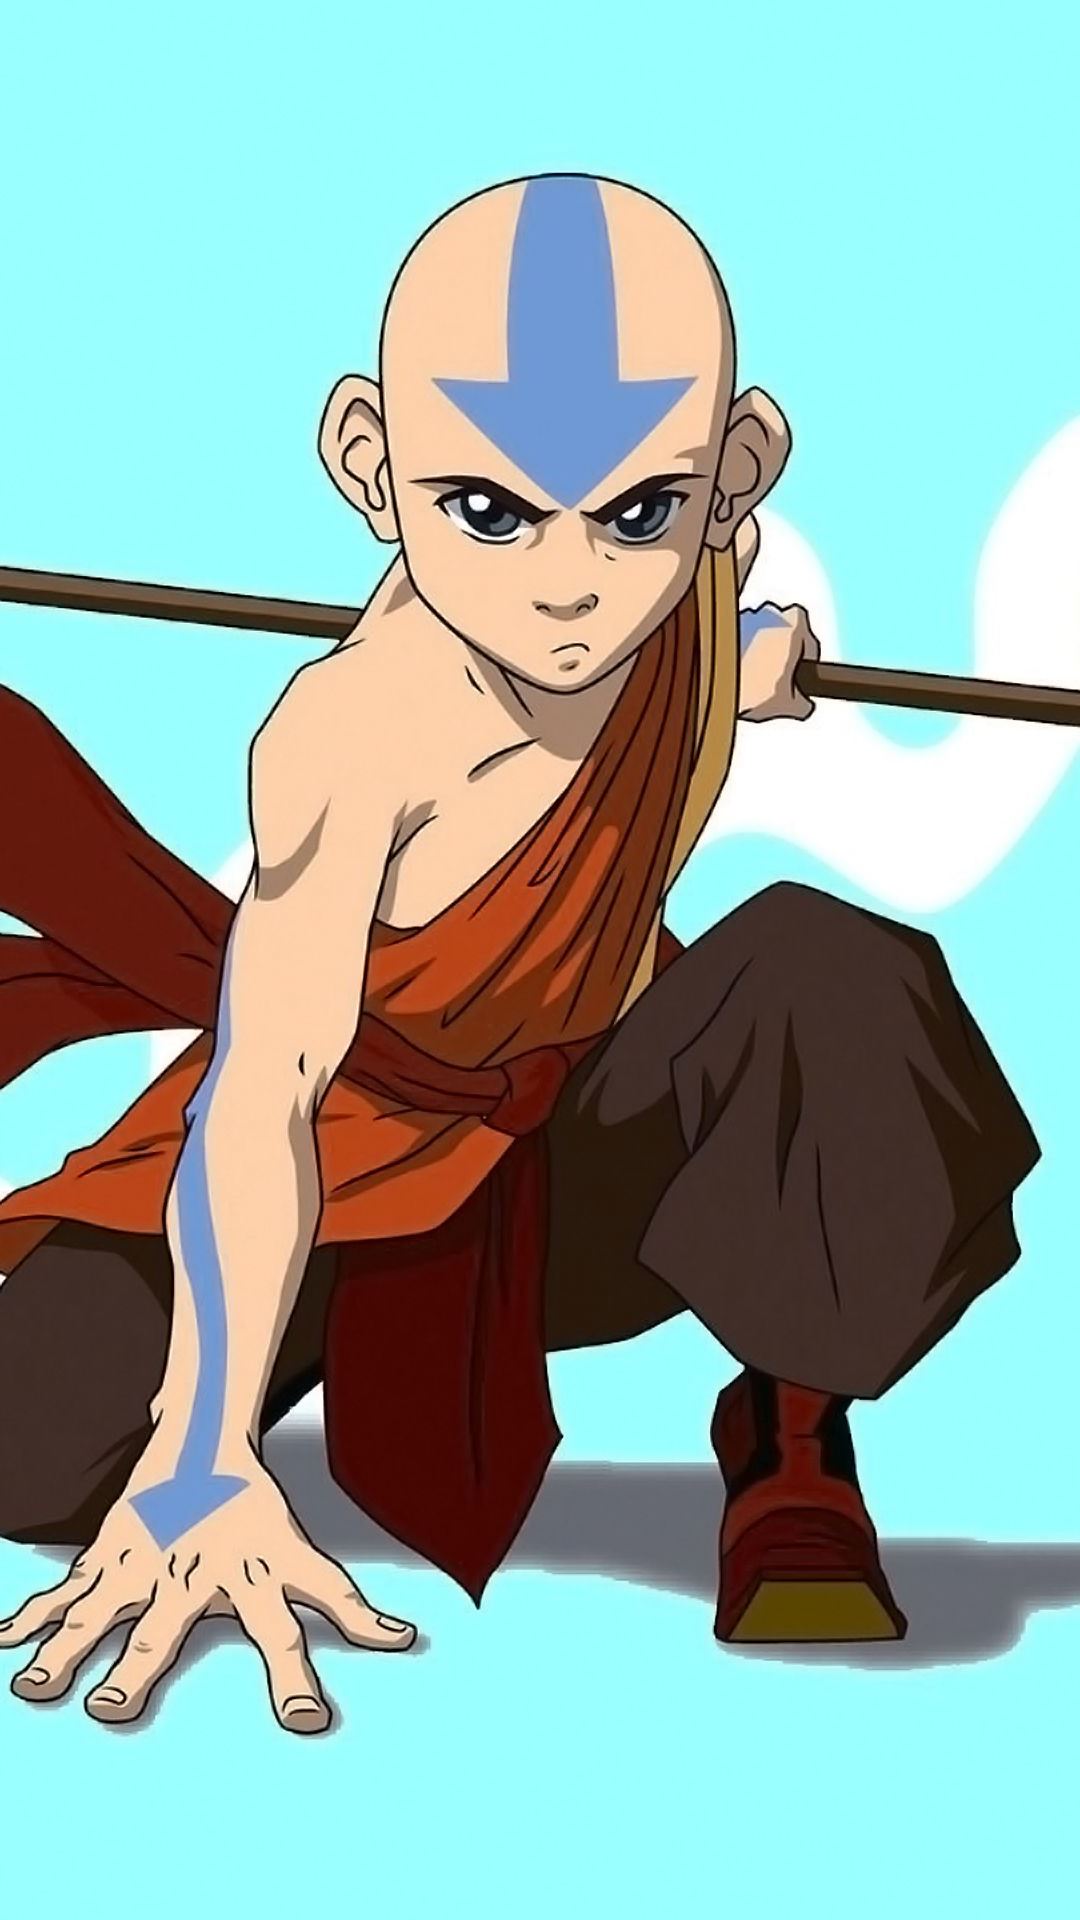 Hd Avatar The Last Airbender Wallpaper For Android Aang The Legend Of